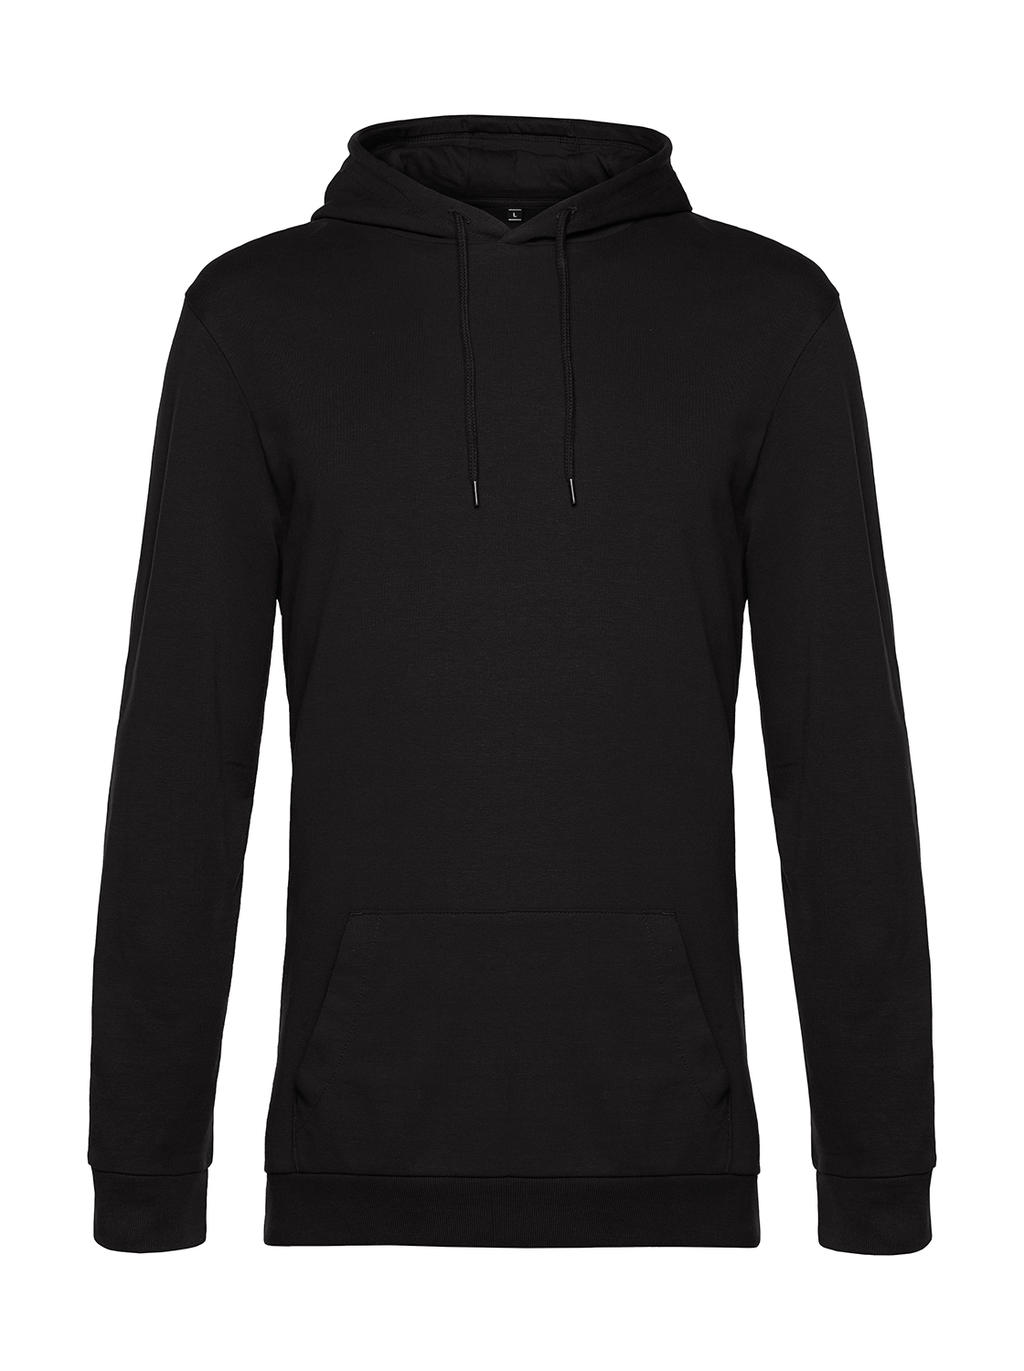  #Hoodie French Terry in Farbe Black Pure